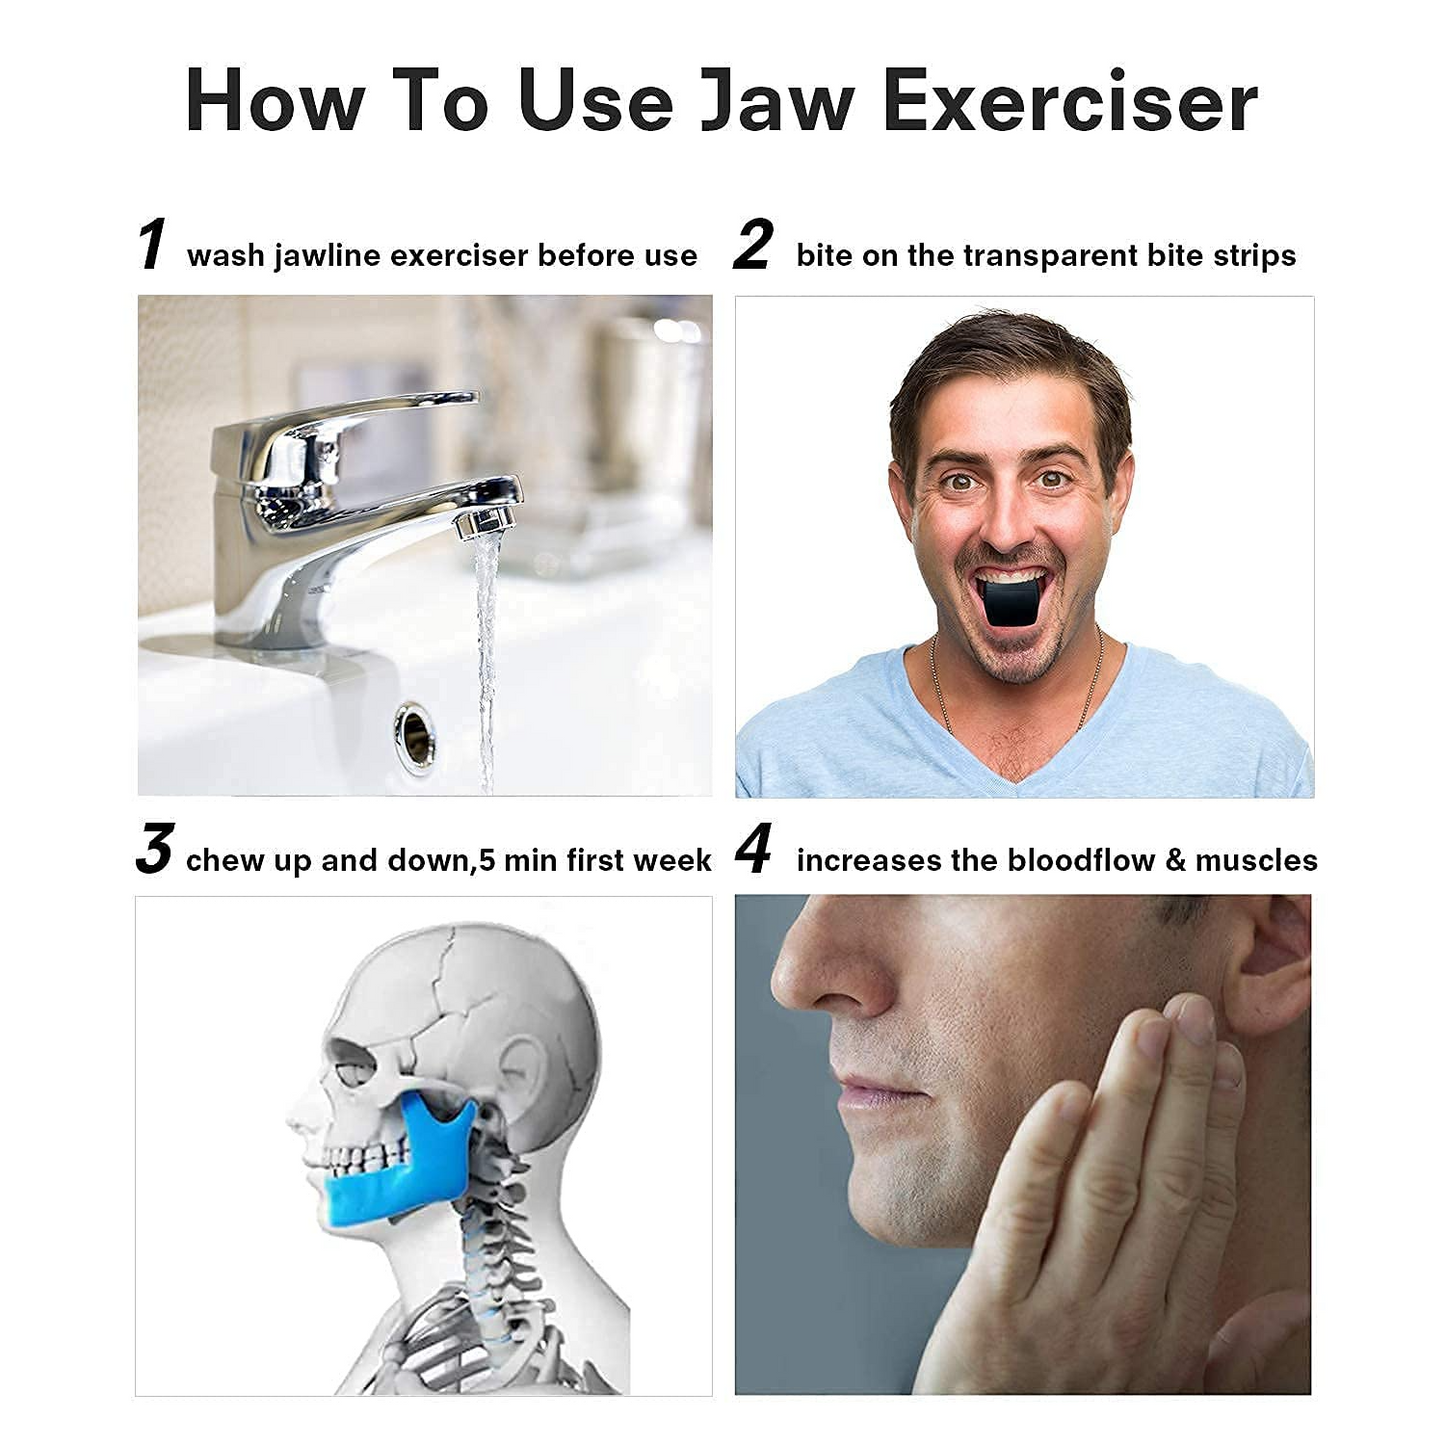 Jawline Exerciser - Mouth Exercise Equipment